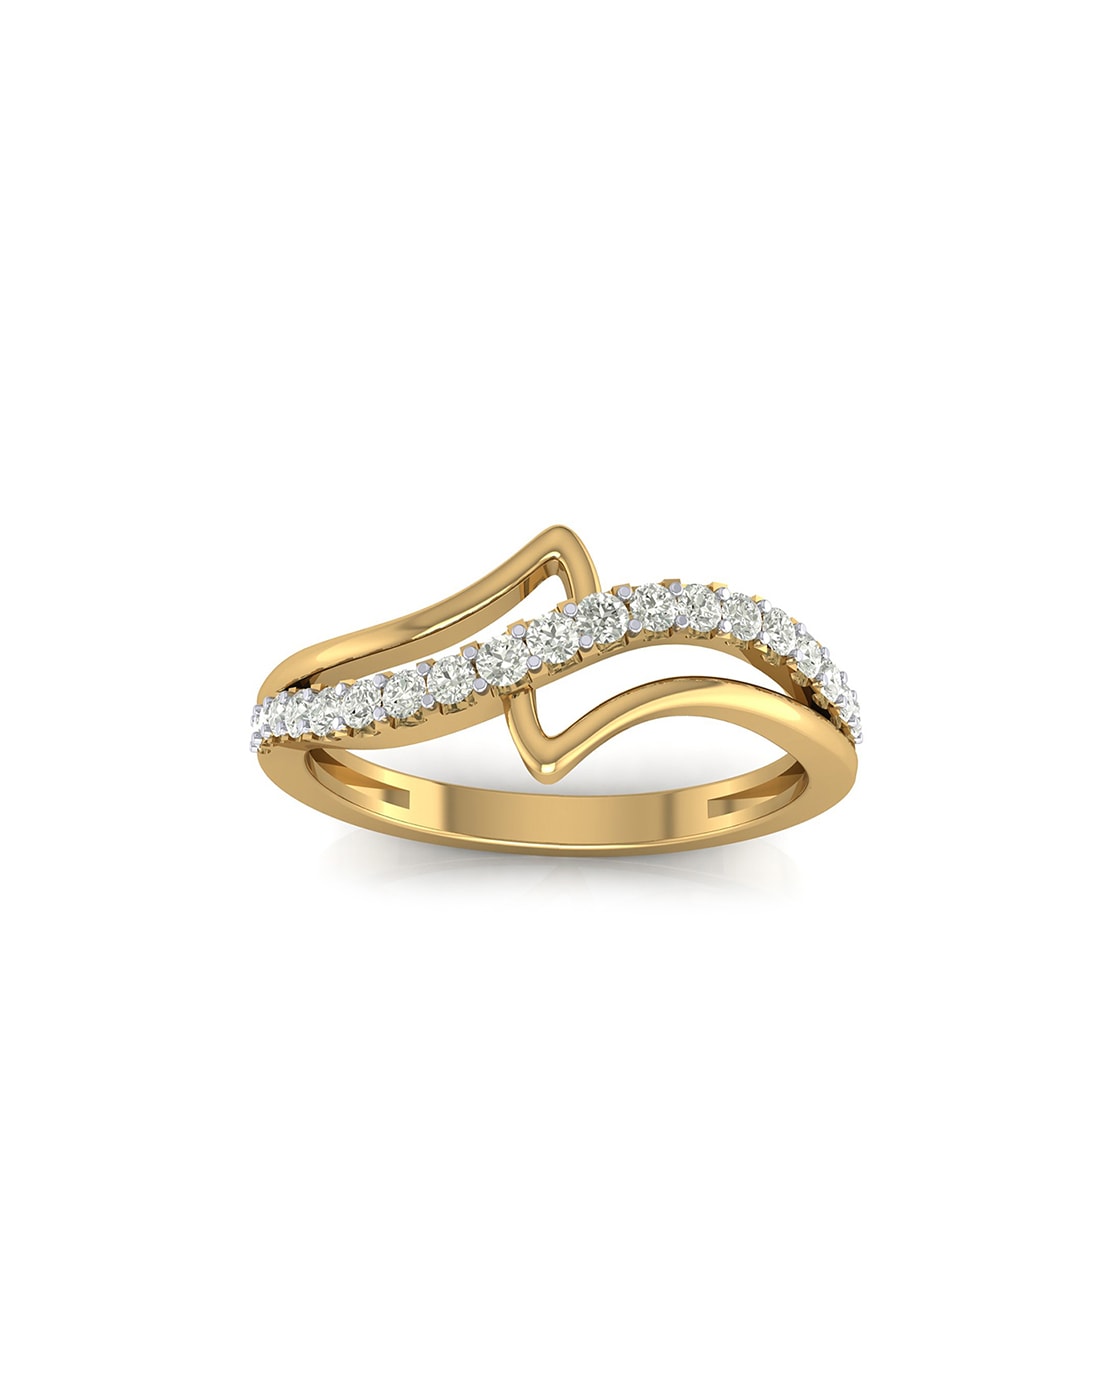 Latest Diamond Rings Designs In Gold | Gold ring designs, Gold rings  jewelry, Diamond rings design